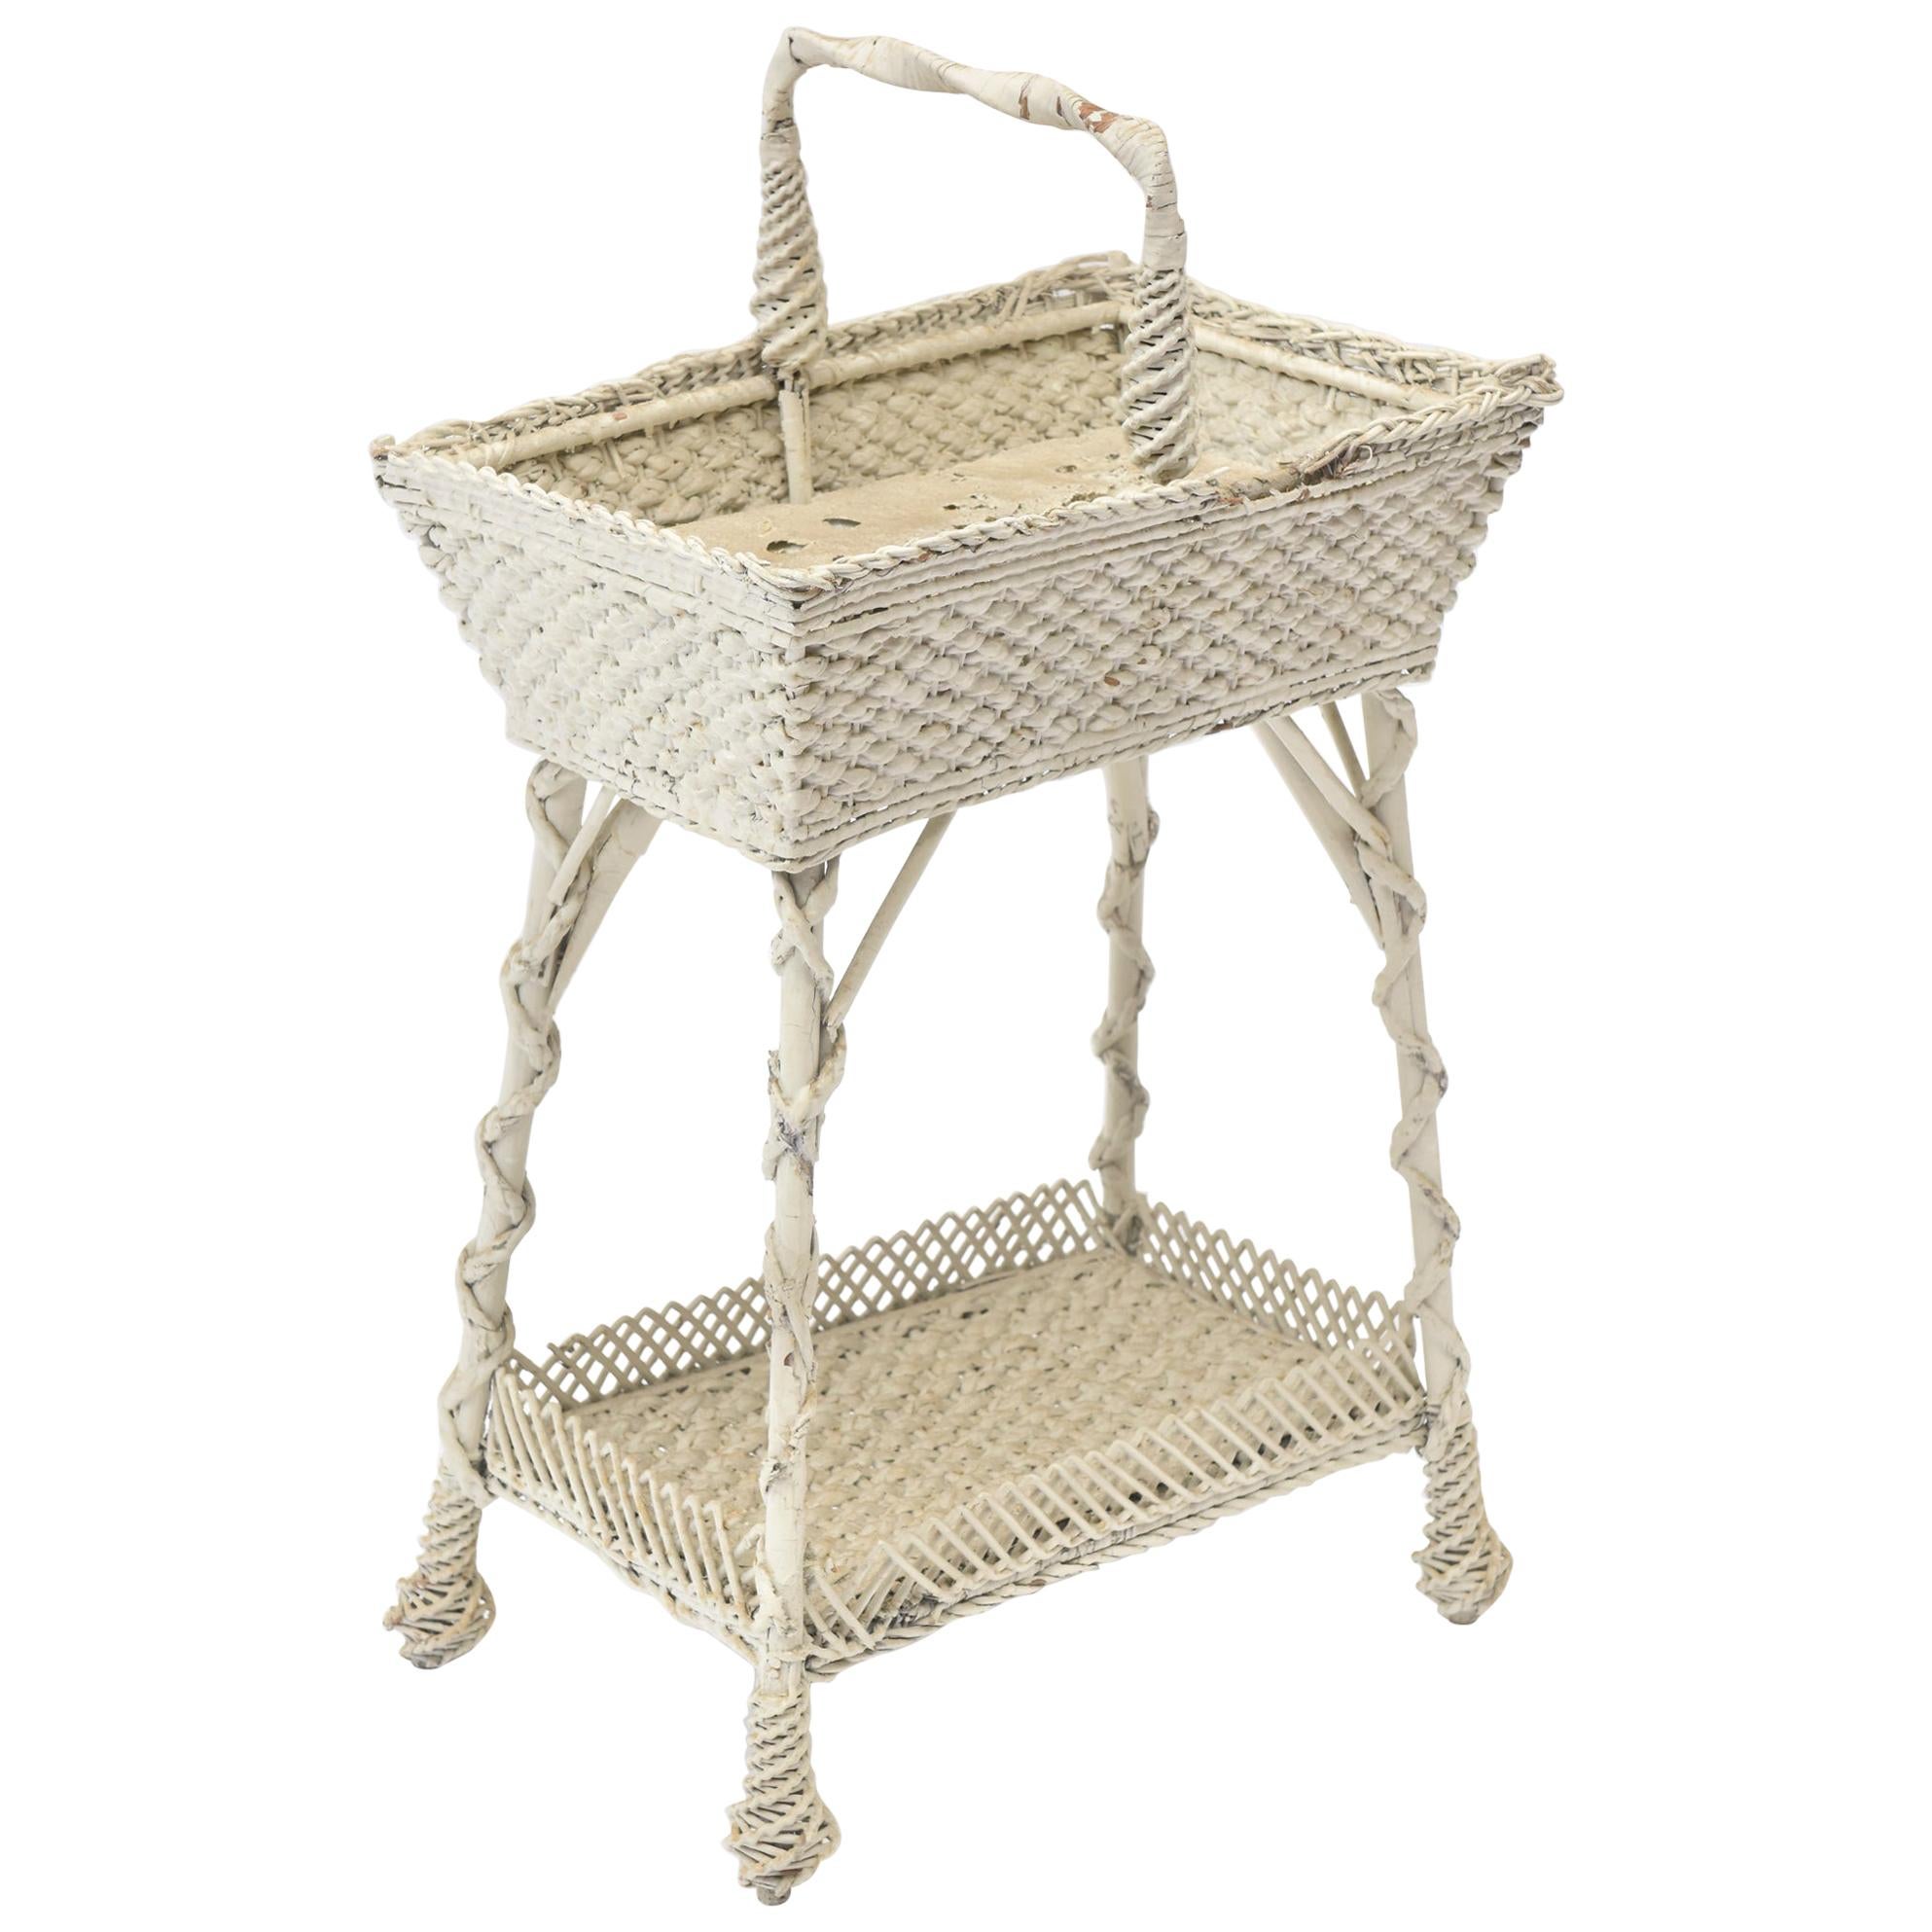 Early 20th Century Wicker Sewing Stand